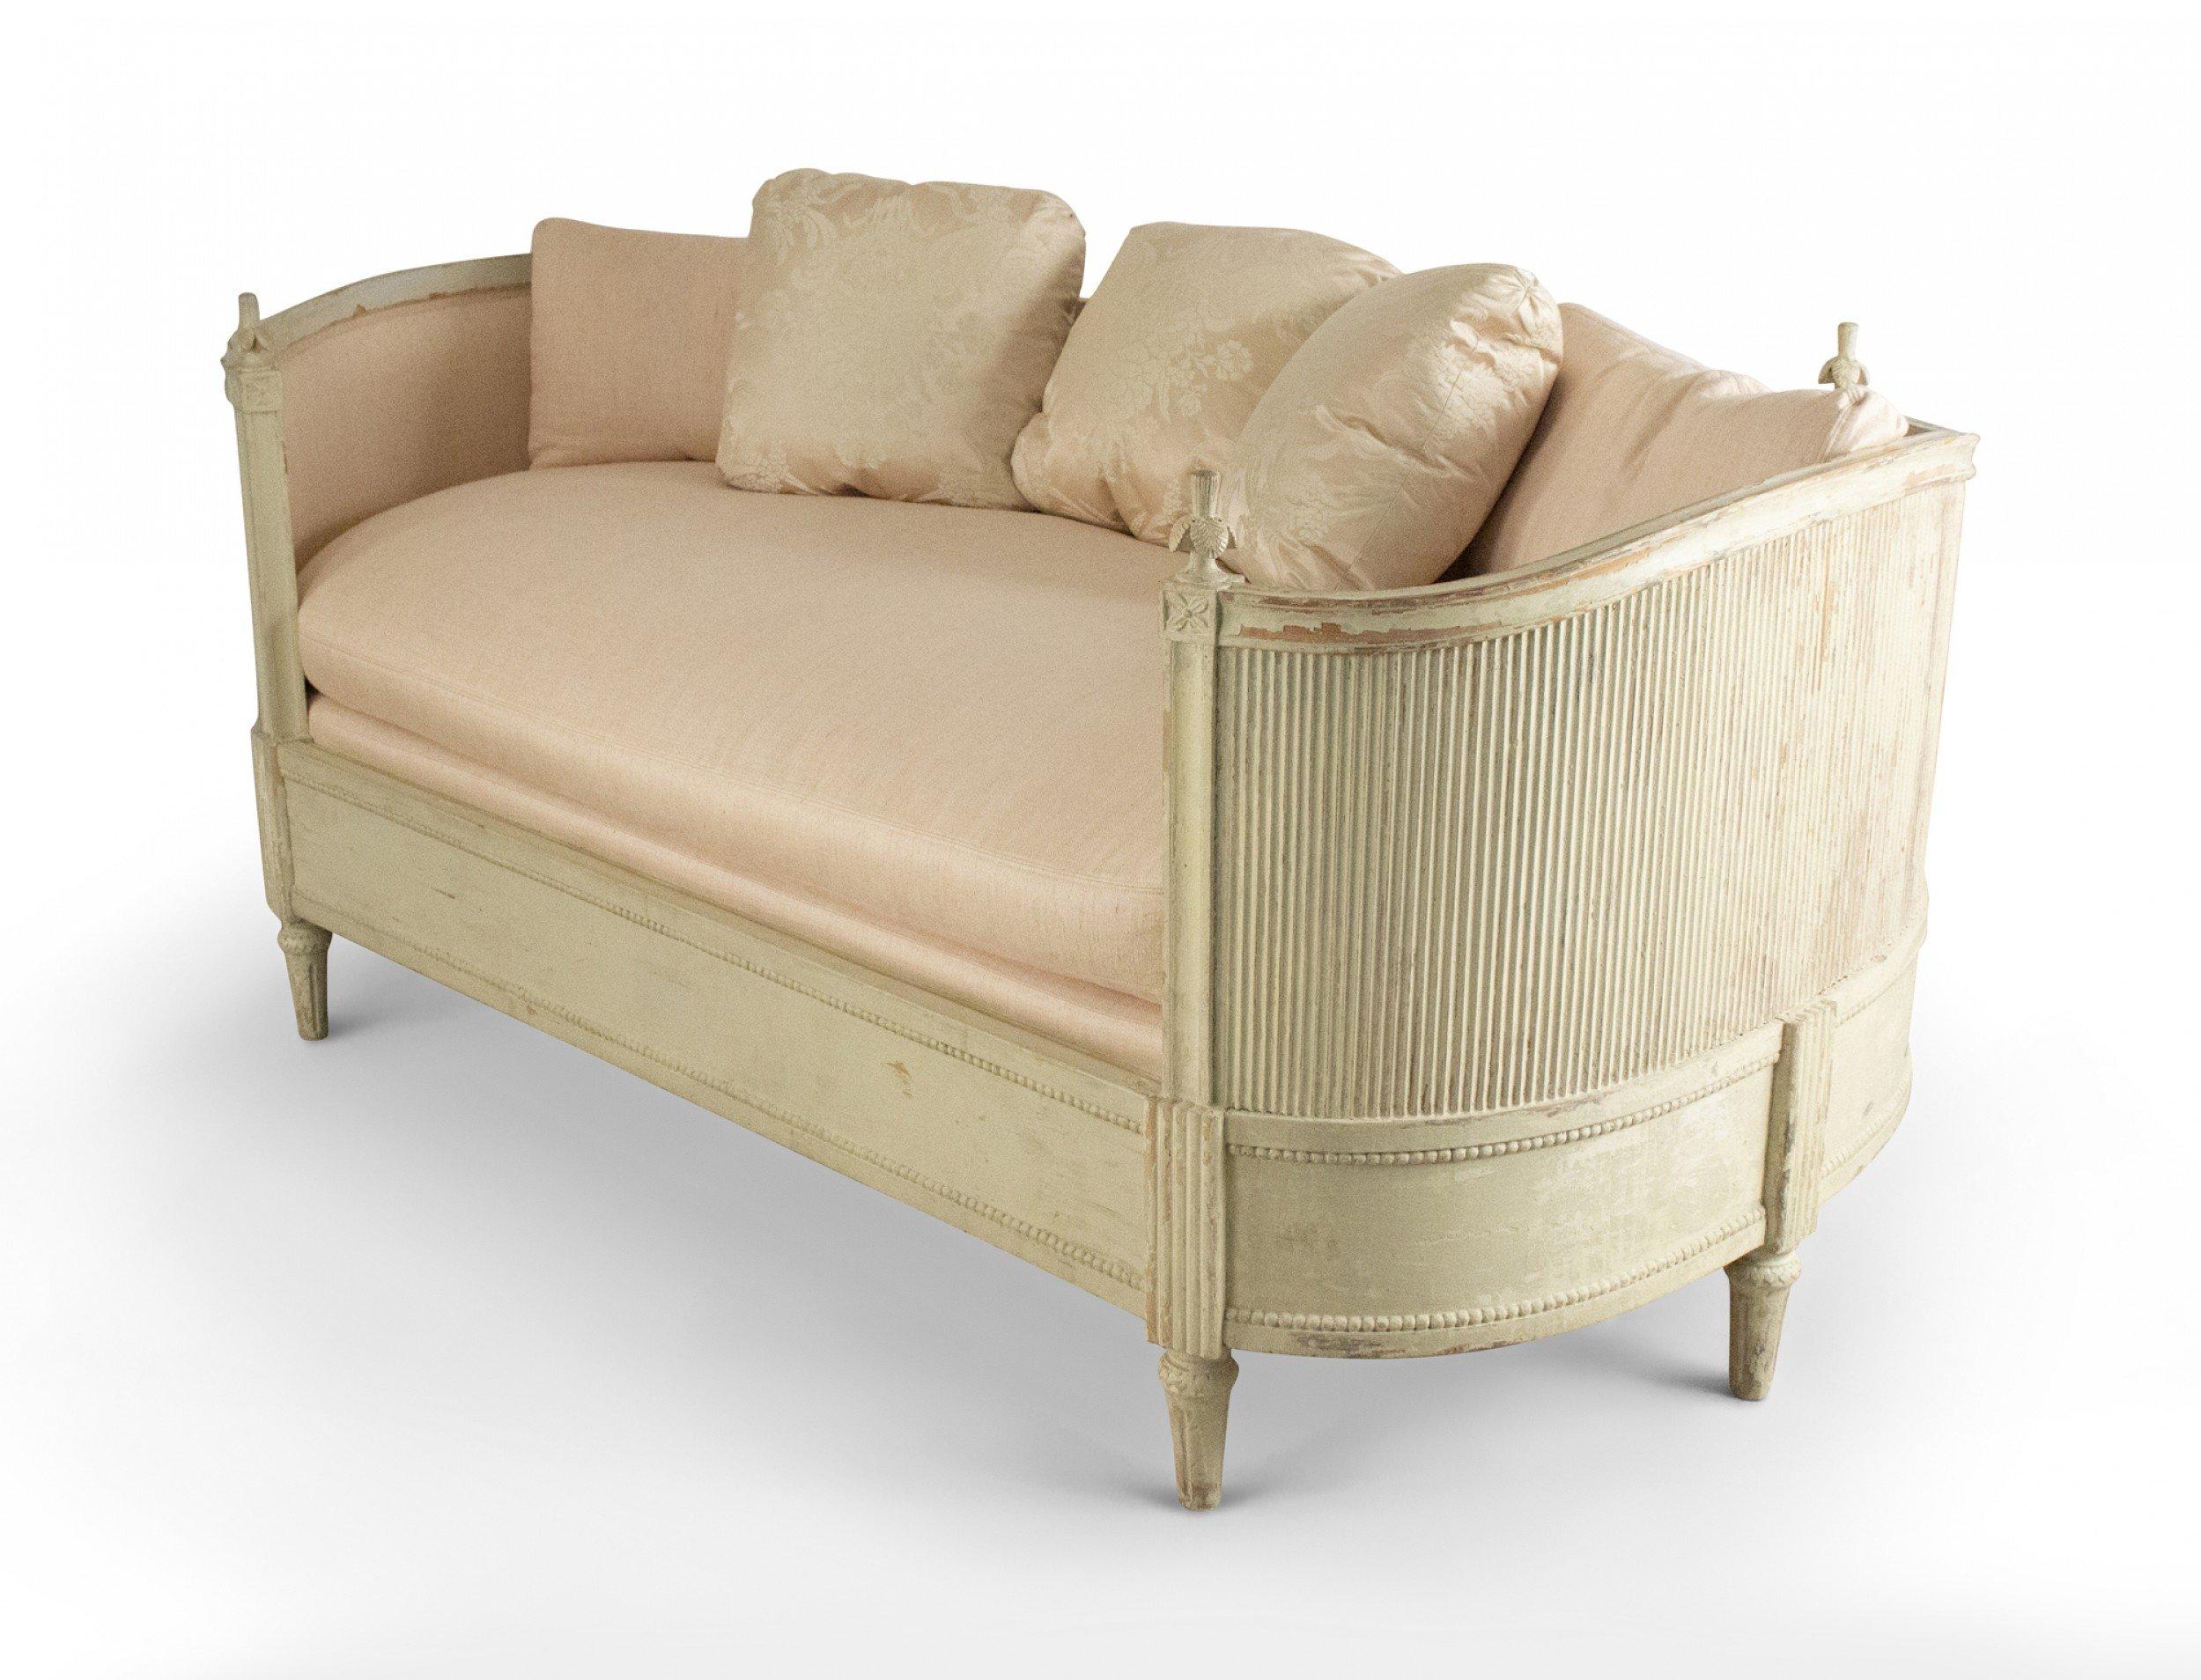 Louis XVI Style White Painted Wooden Daybed with Curved Back and Pink Upholstery For Sale 2